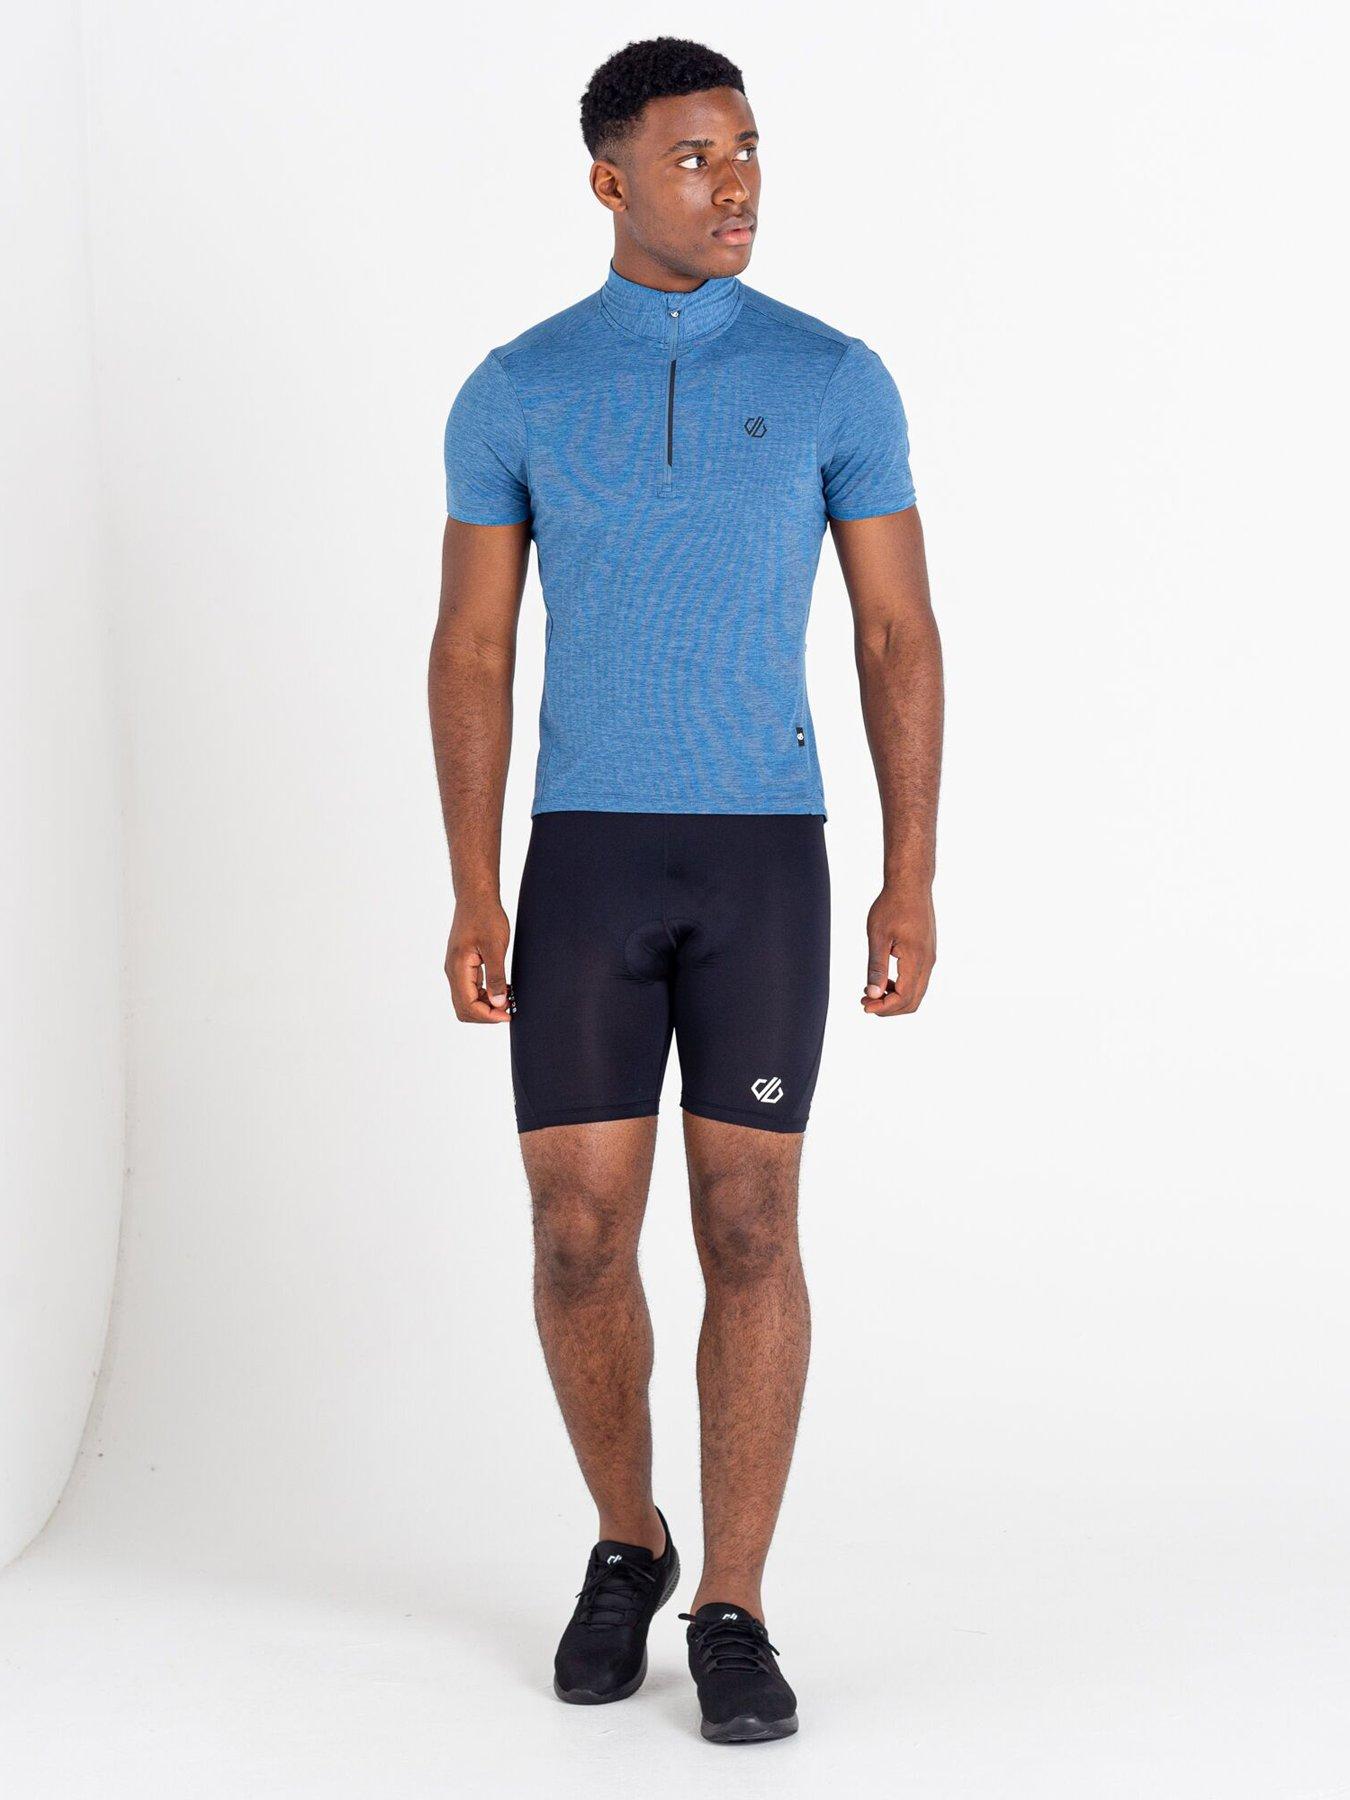 Men PEDAL IT OUT SHORT SLEEVE MENS BLUE CYCLING JERSEY